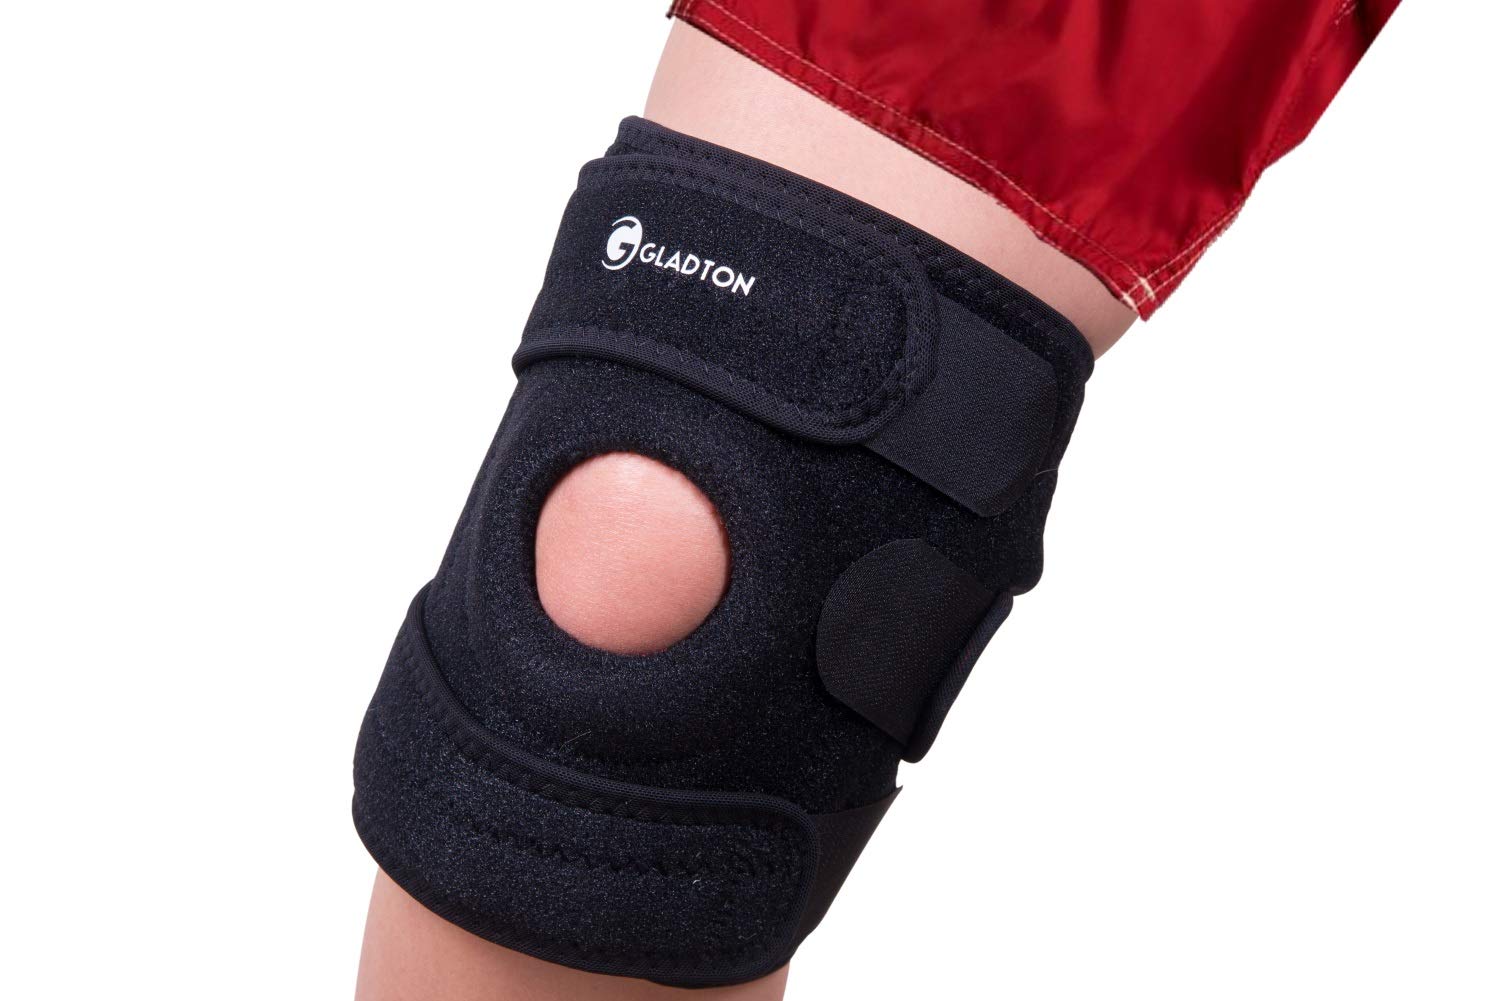  Patella Knee Brace for Arthritis Pain and Support with Side  Stabilizers for Meniscus Tear, Women, Men, Acl, Running, Mcl, Tendonitis,  Athletic, Lcl - Adjustable Neoprene Open Knee Sleeve -Black : Health